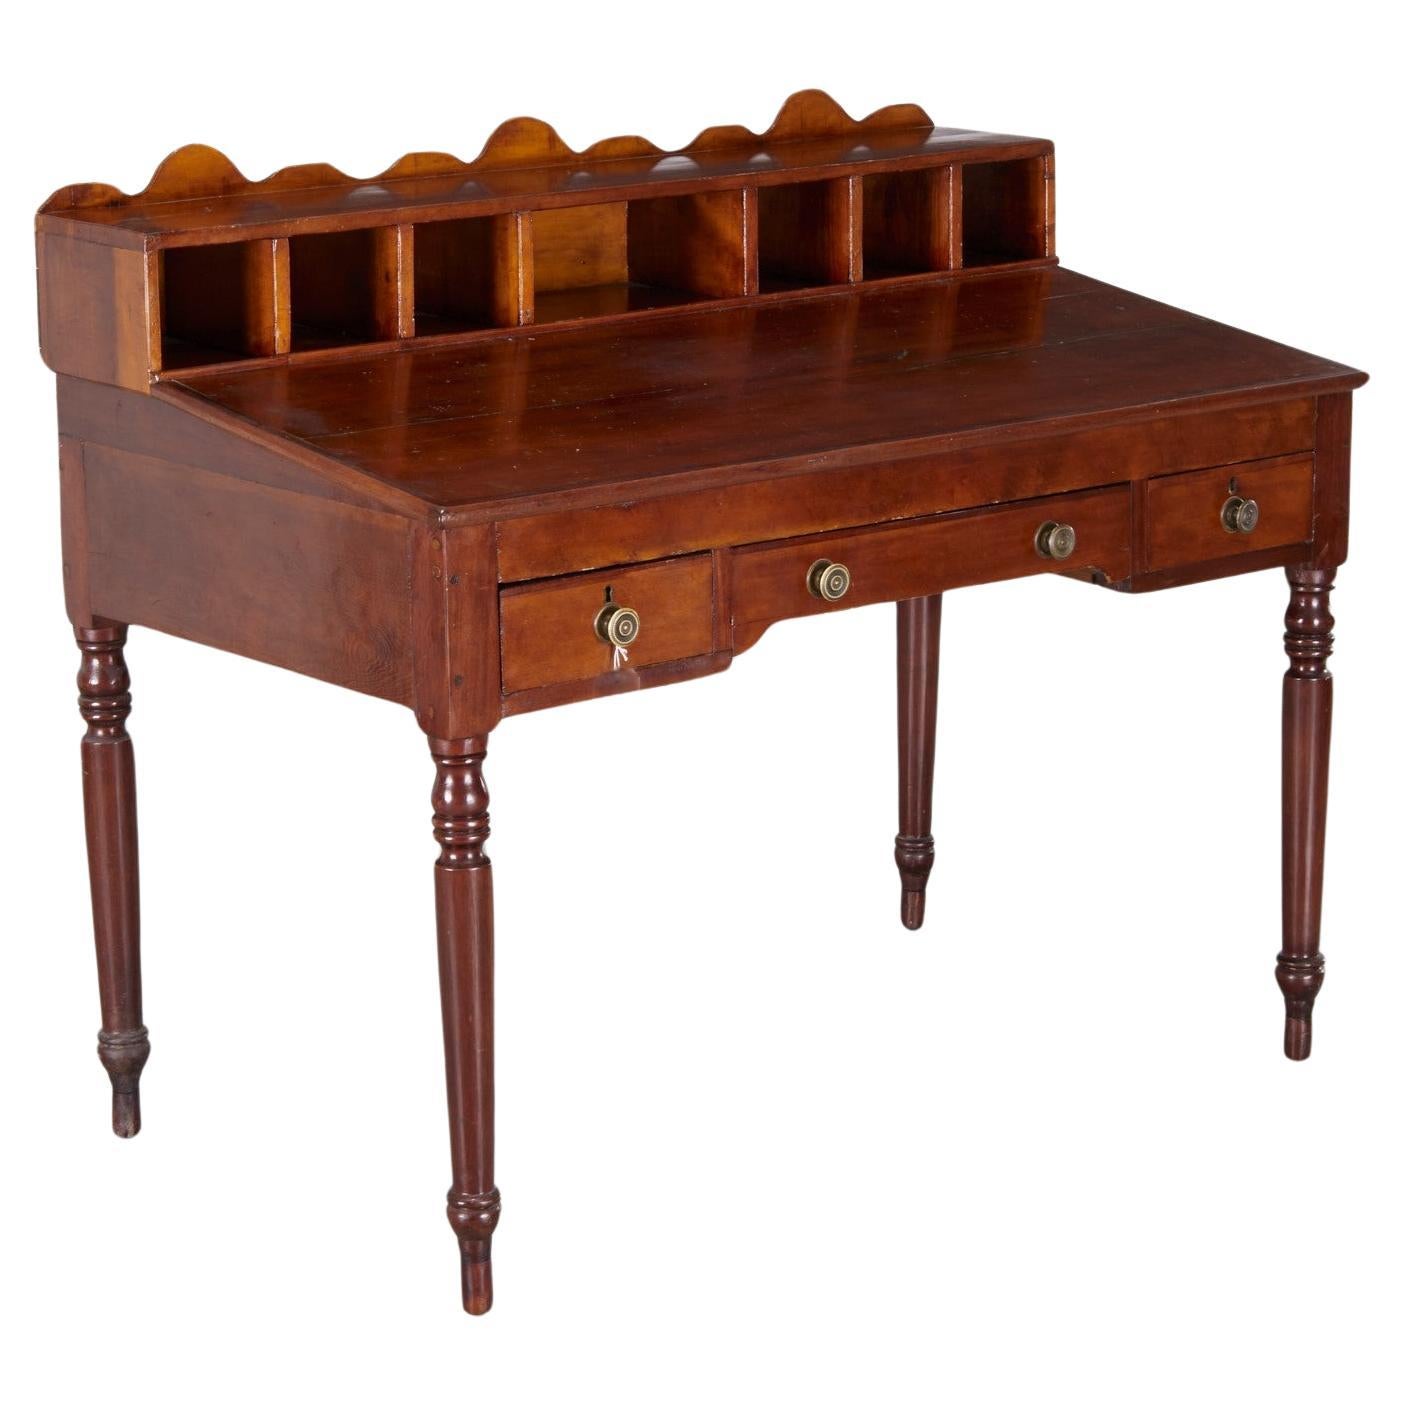 Unusual Antique American Sheraton Clerk's Desk with Gallery For Sale